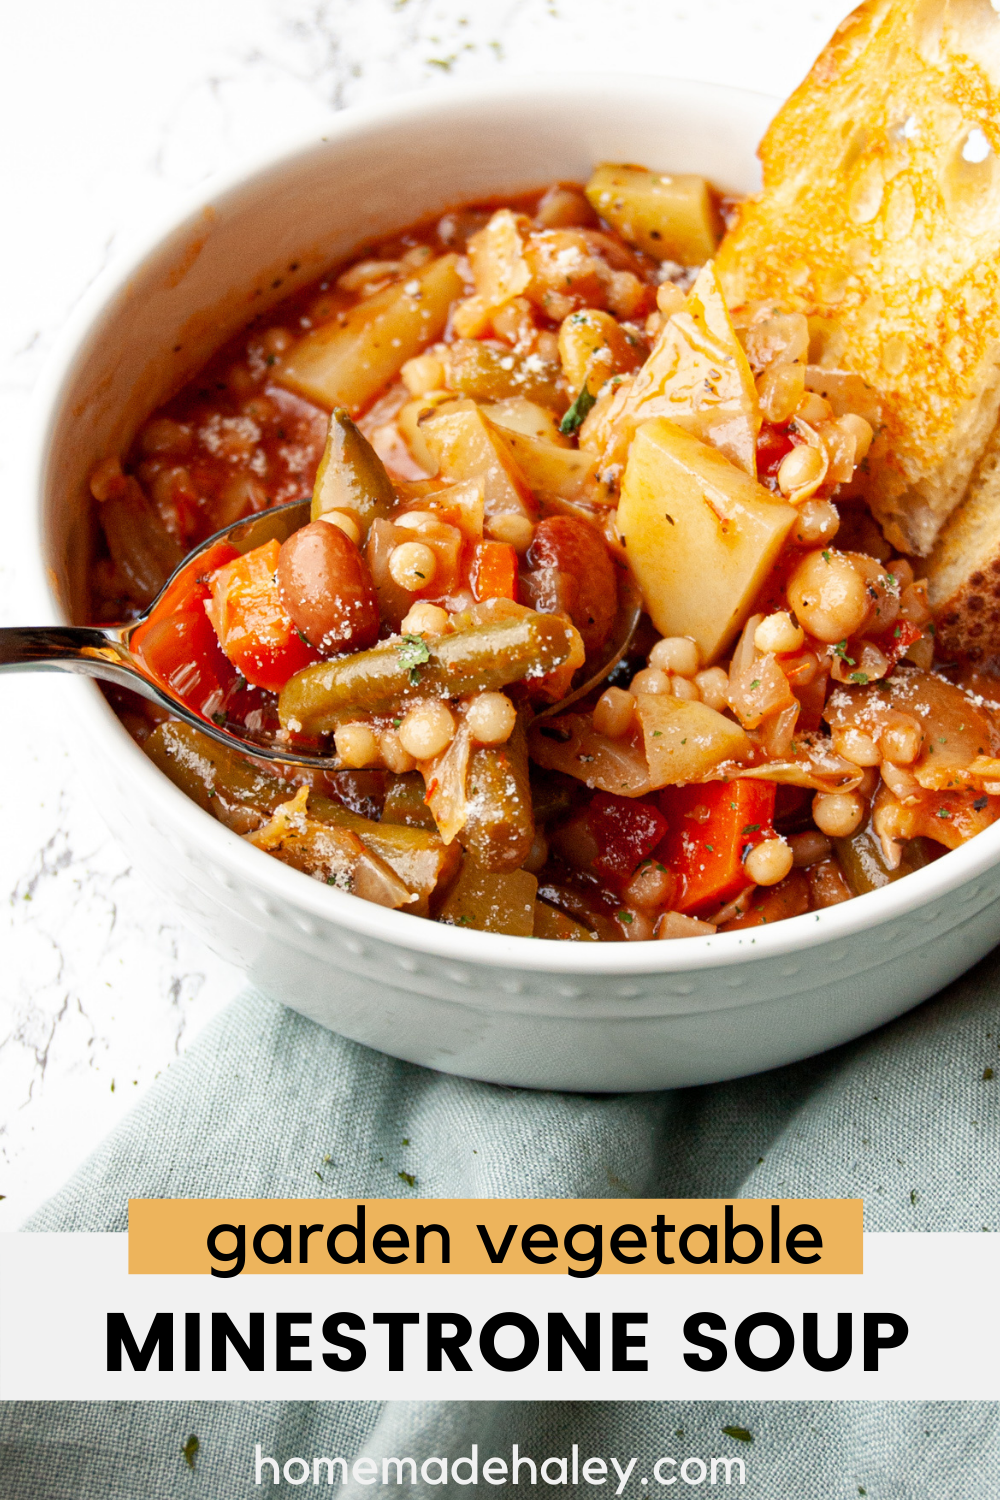 This Minestrone Soup is loaded with garden vegetables, beans, and pasta to warm your soul and fill your stomach! Versatile for any season or taste.